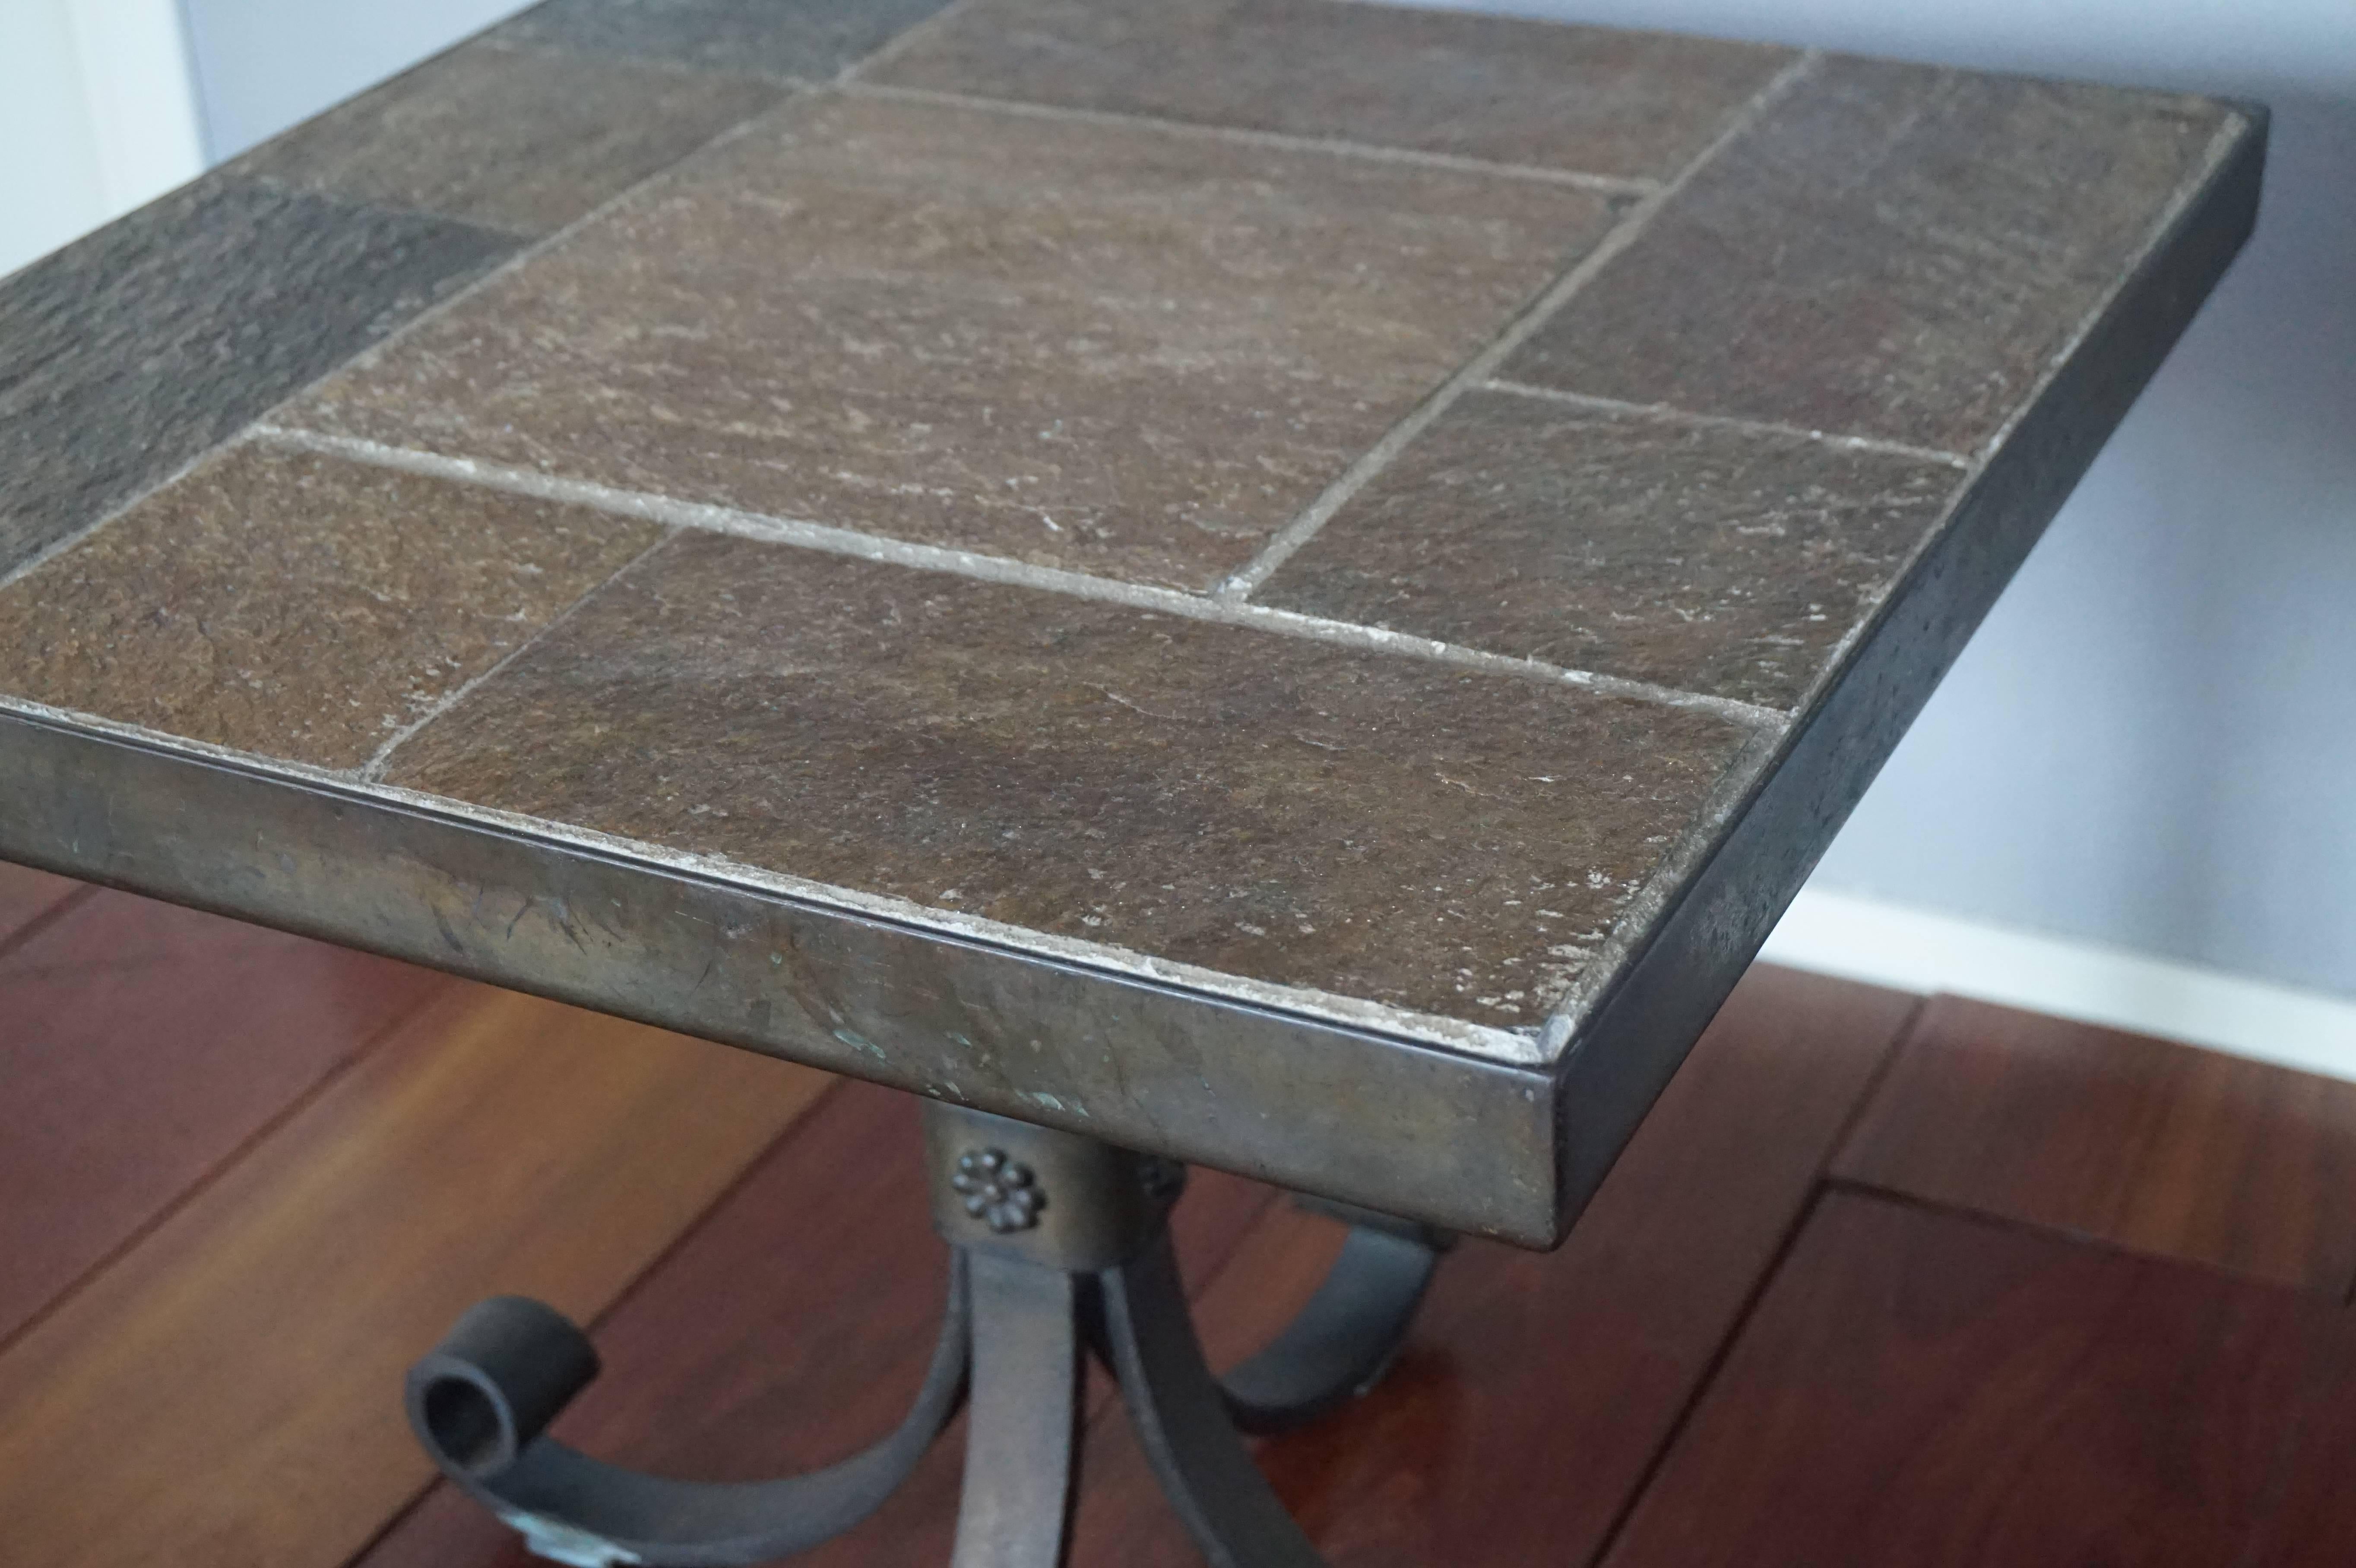 Rare design and practical size Brutalist table.

If you are looking for a coffee or end table that stands out from all the other ones than this rare Brutalist one is definitely worth looking into. First of all, it comes with an extraordinary,